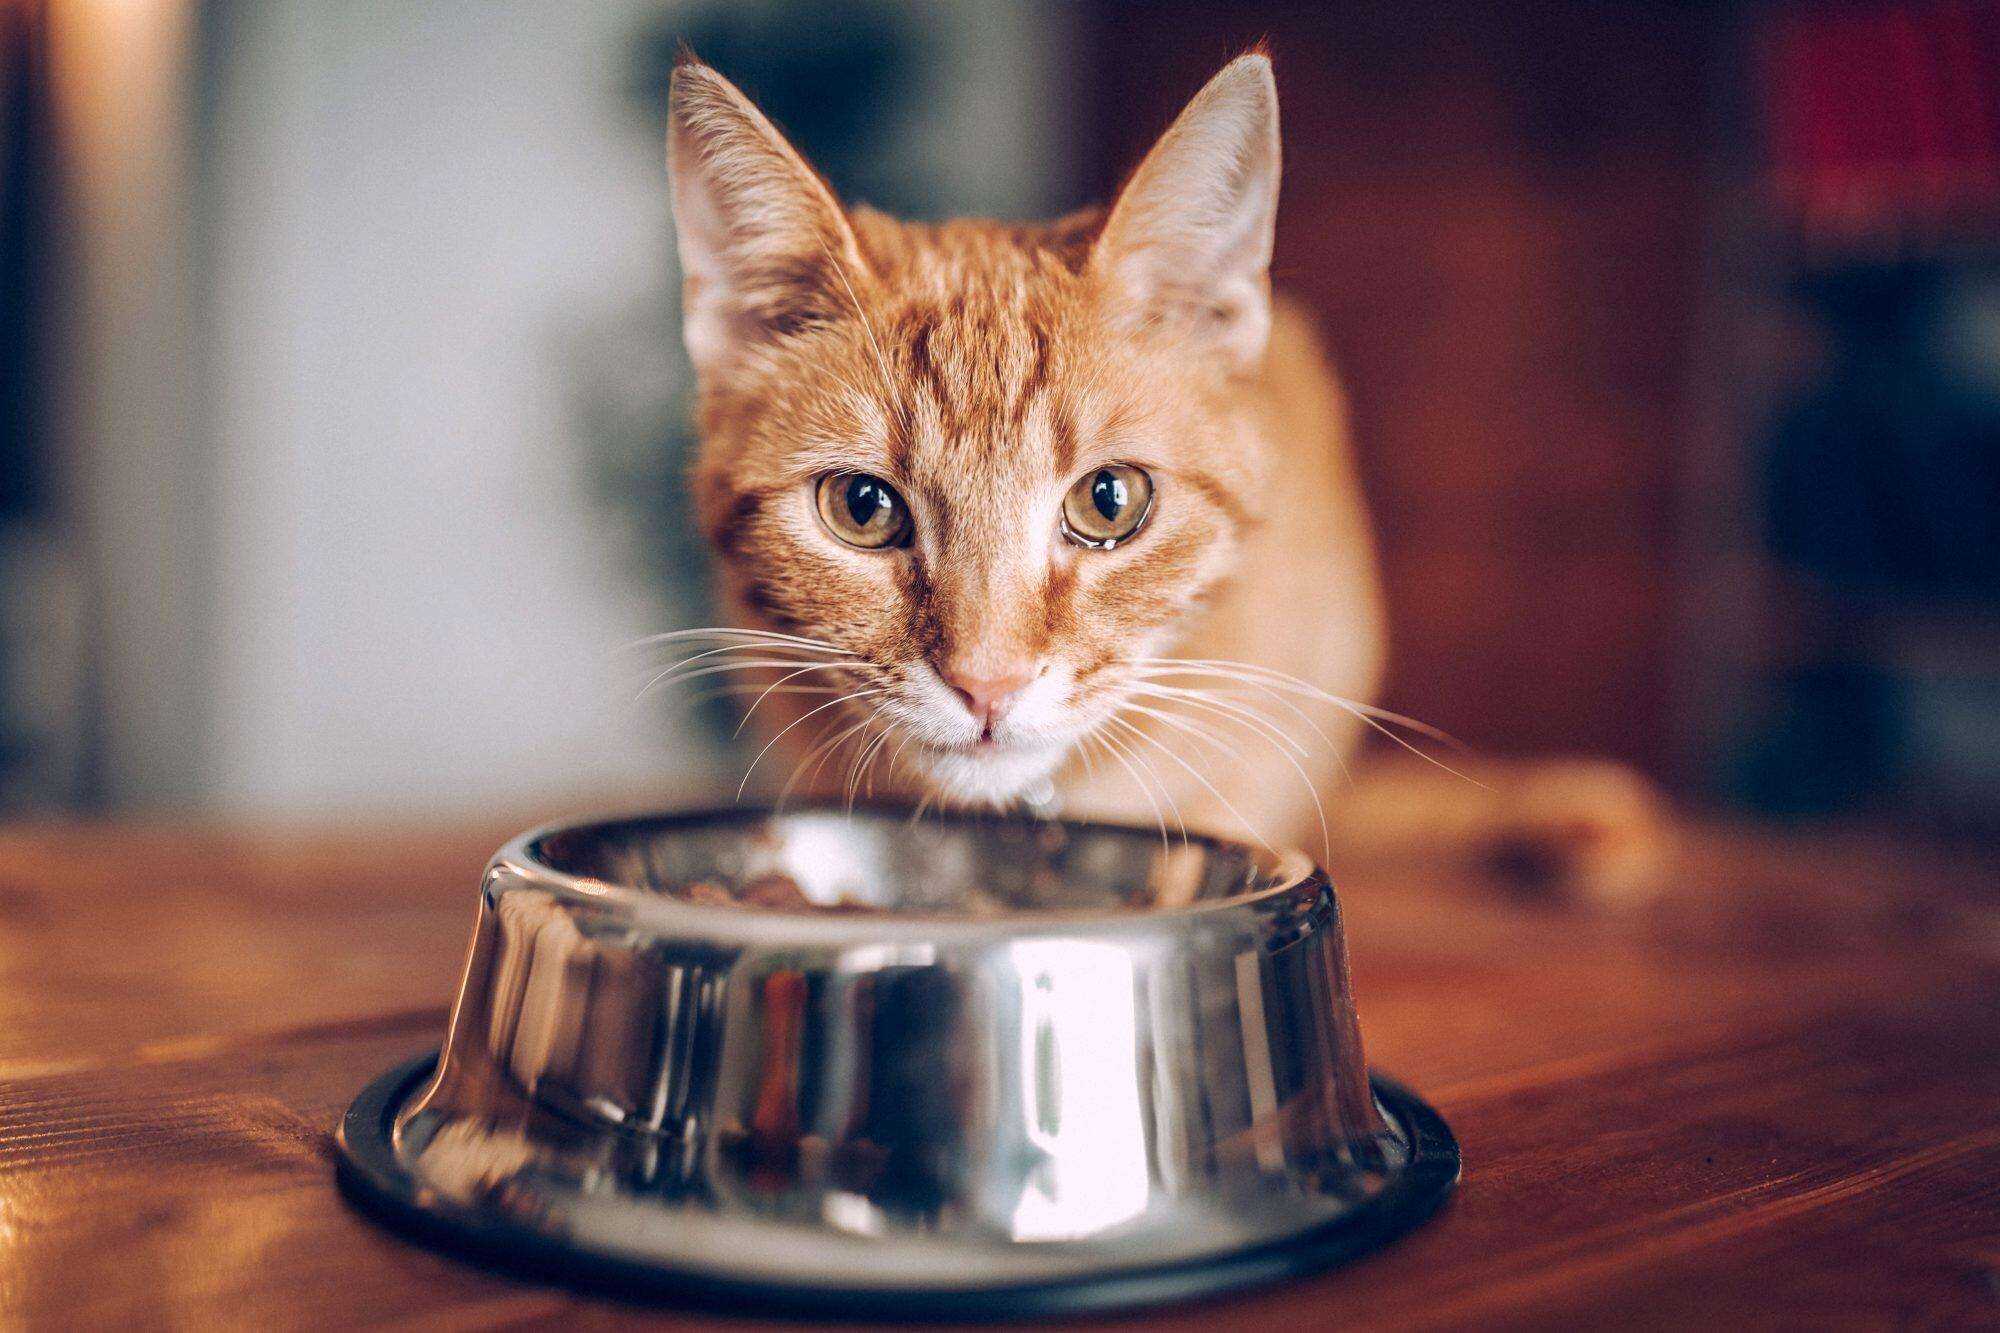 How Long Can a Cat Go Without Eating?